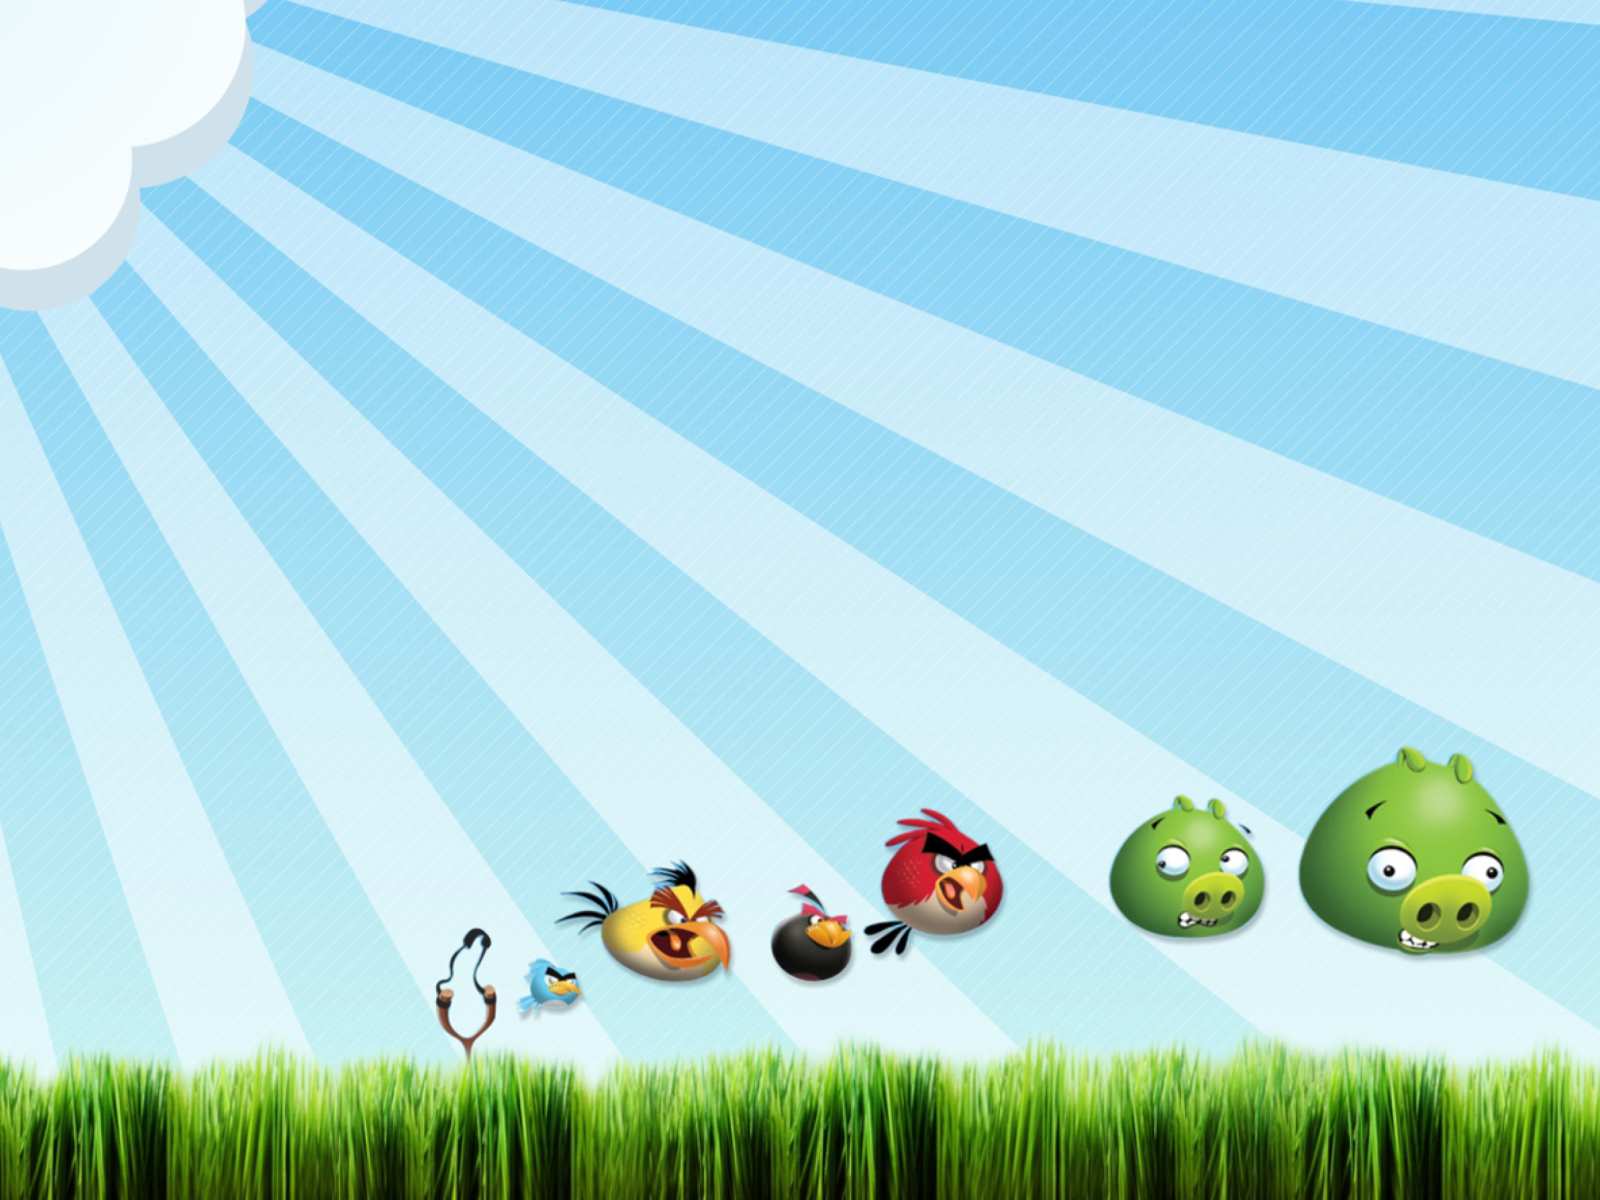 Angry Birds Bad Pigs wallpaper 1600x1200